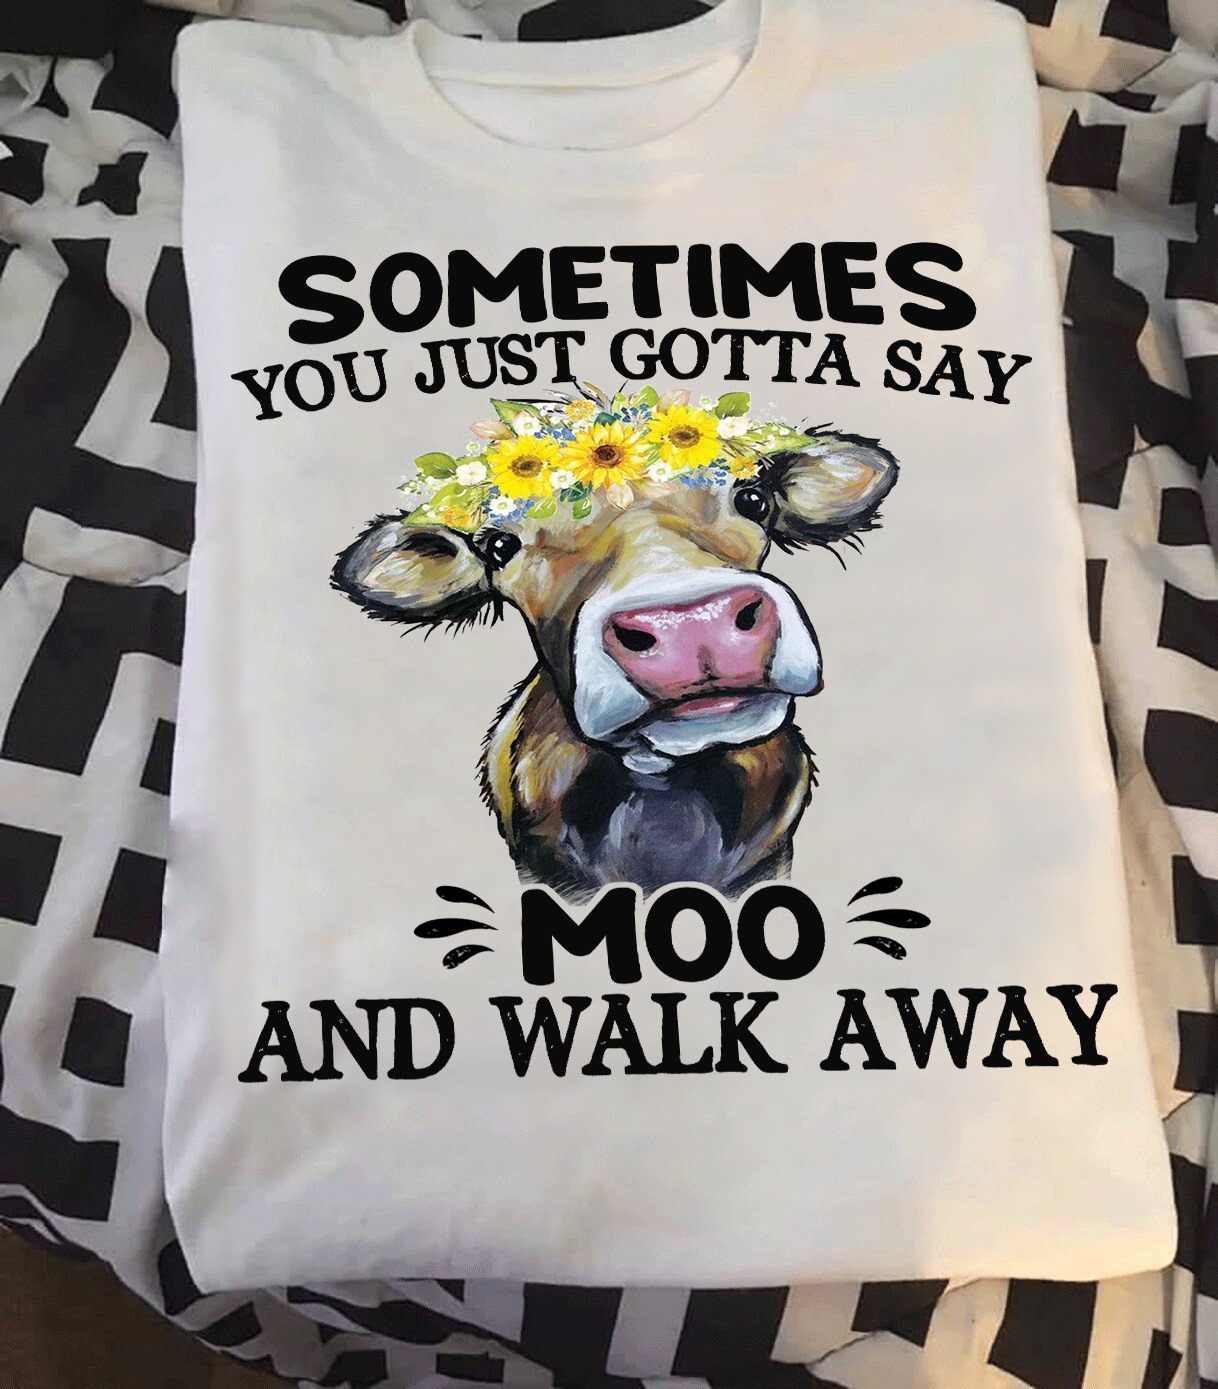 Sometimes you just gotta say moo and walk away - Cows